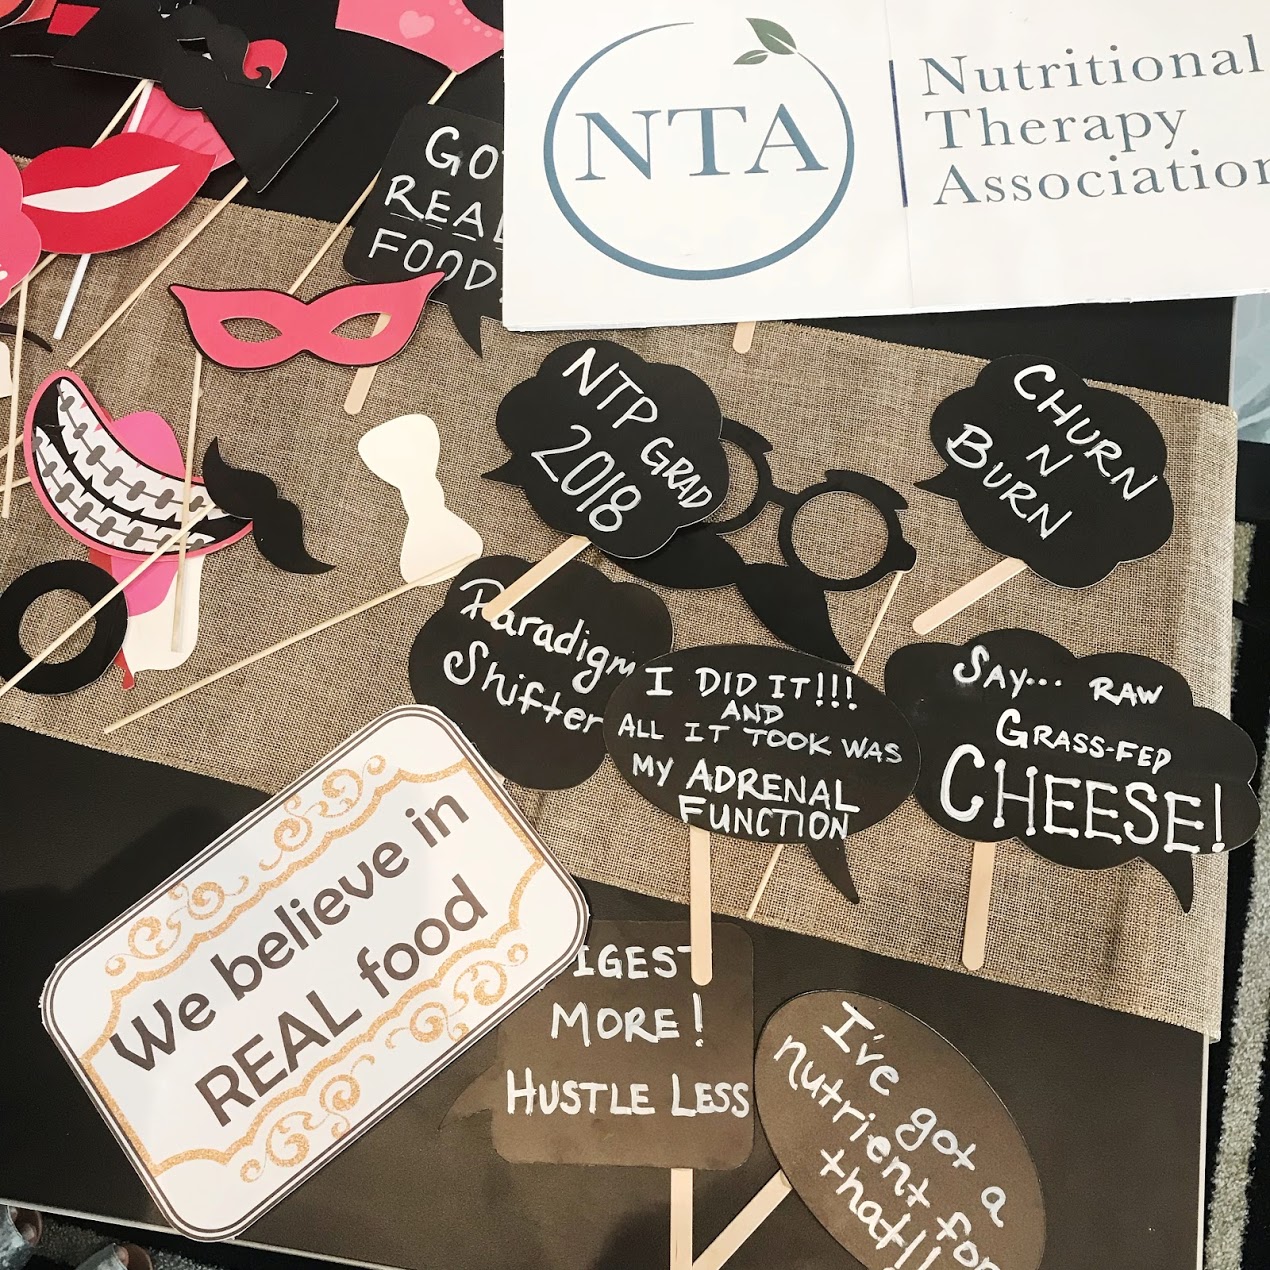 The NTA Program and Why I Became a Nutritional Therapy Practitioner